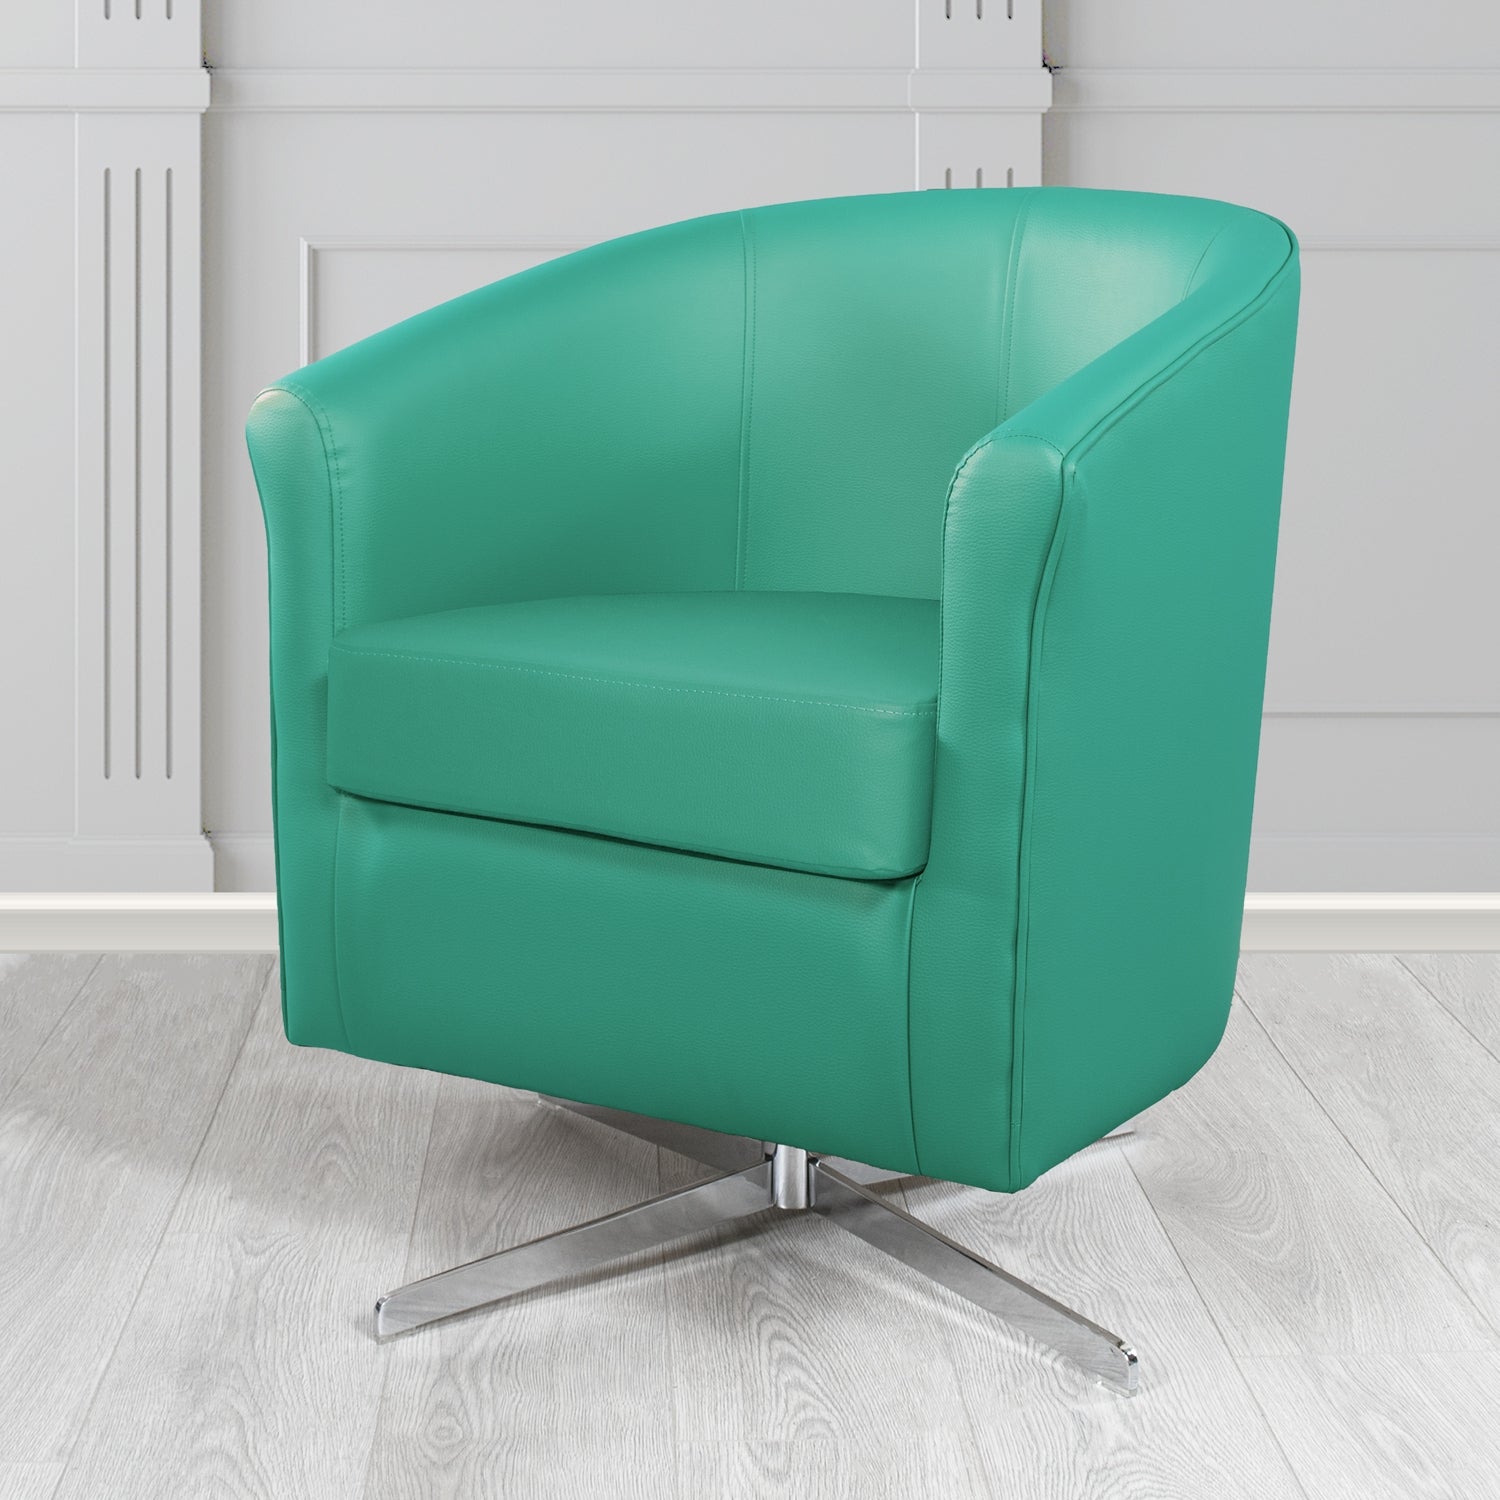 Cannes Swivel Tub Chair in Just Colour Sea Green Crib 5 Faux Leather - The Tub Chair Shop